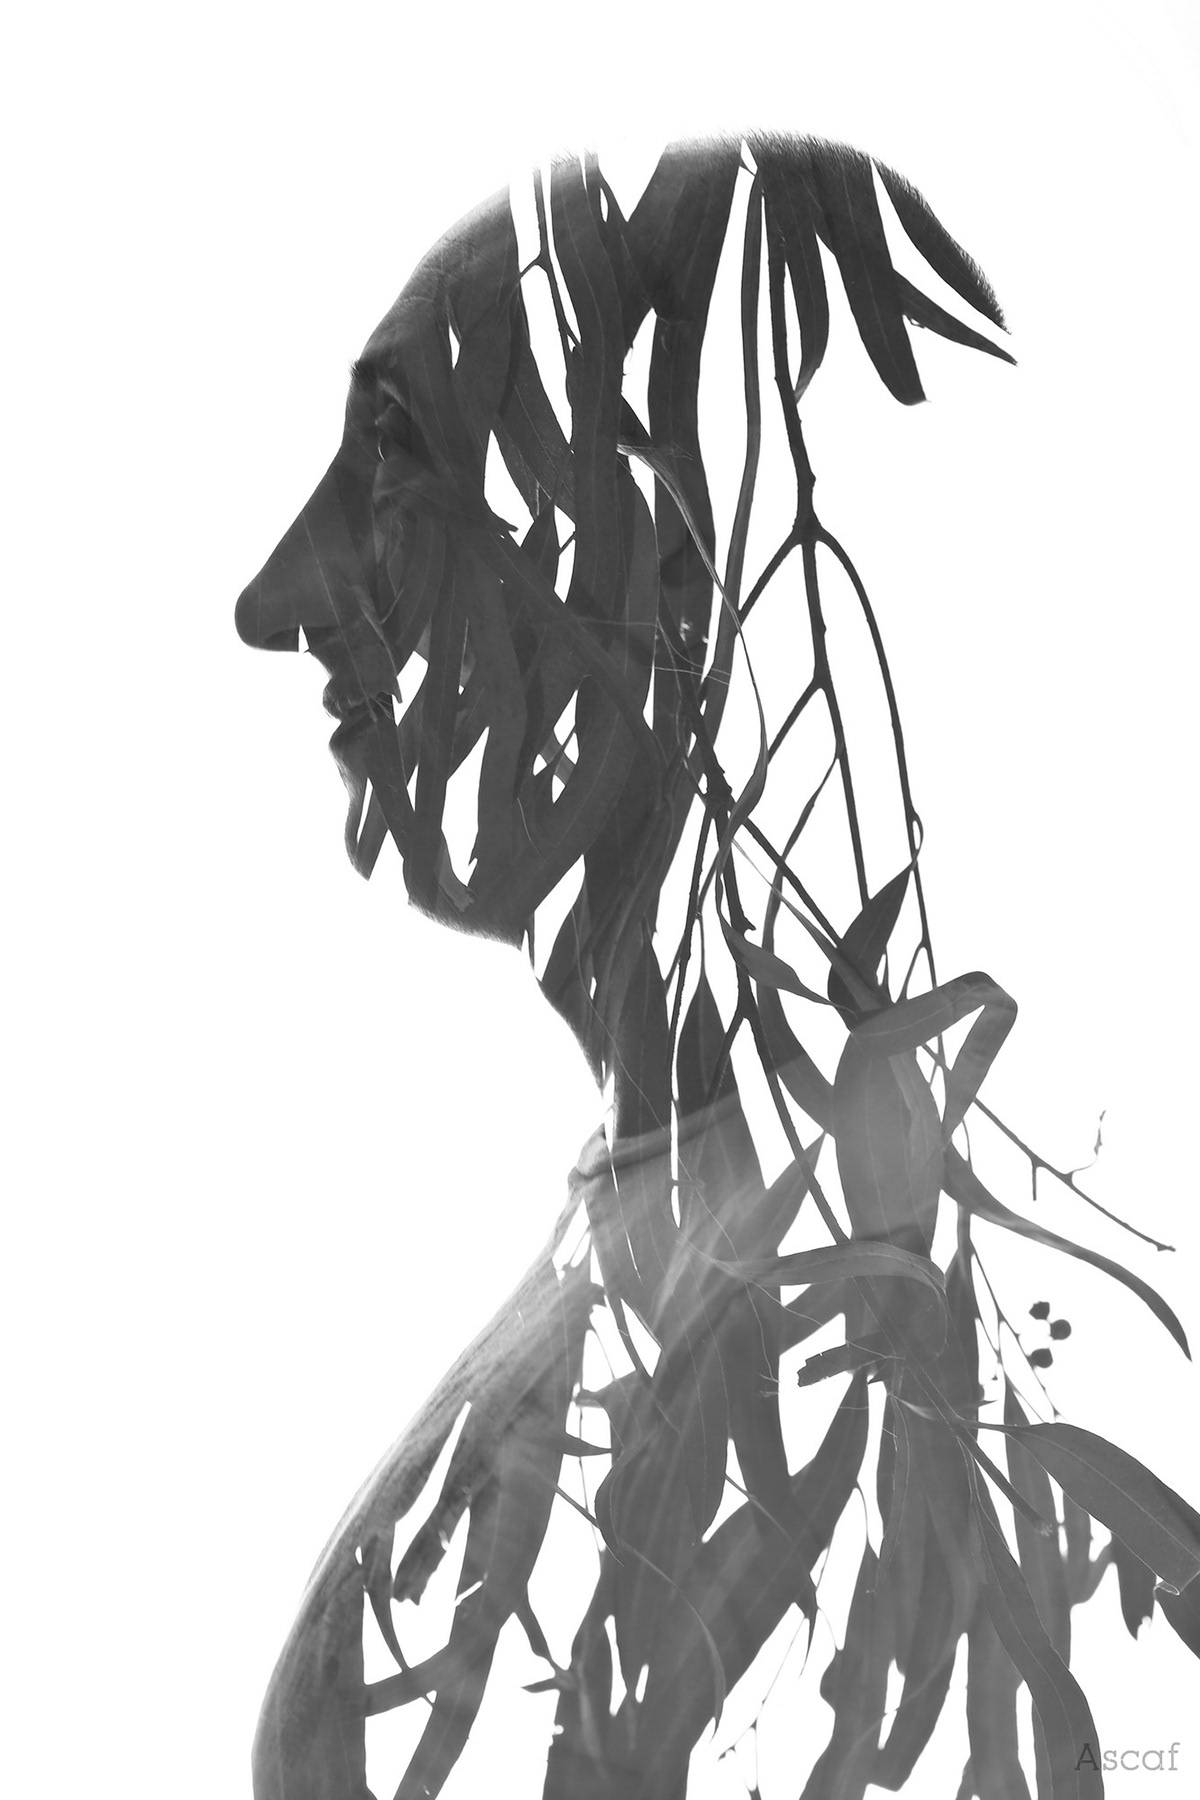 Ascaf double exposure portraits israel Nature people humans leaves branches